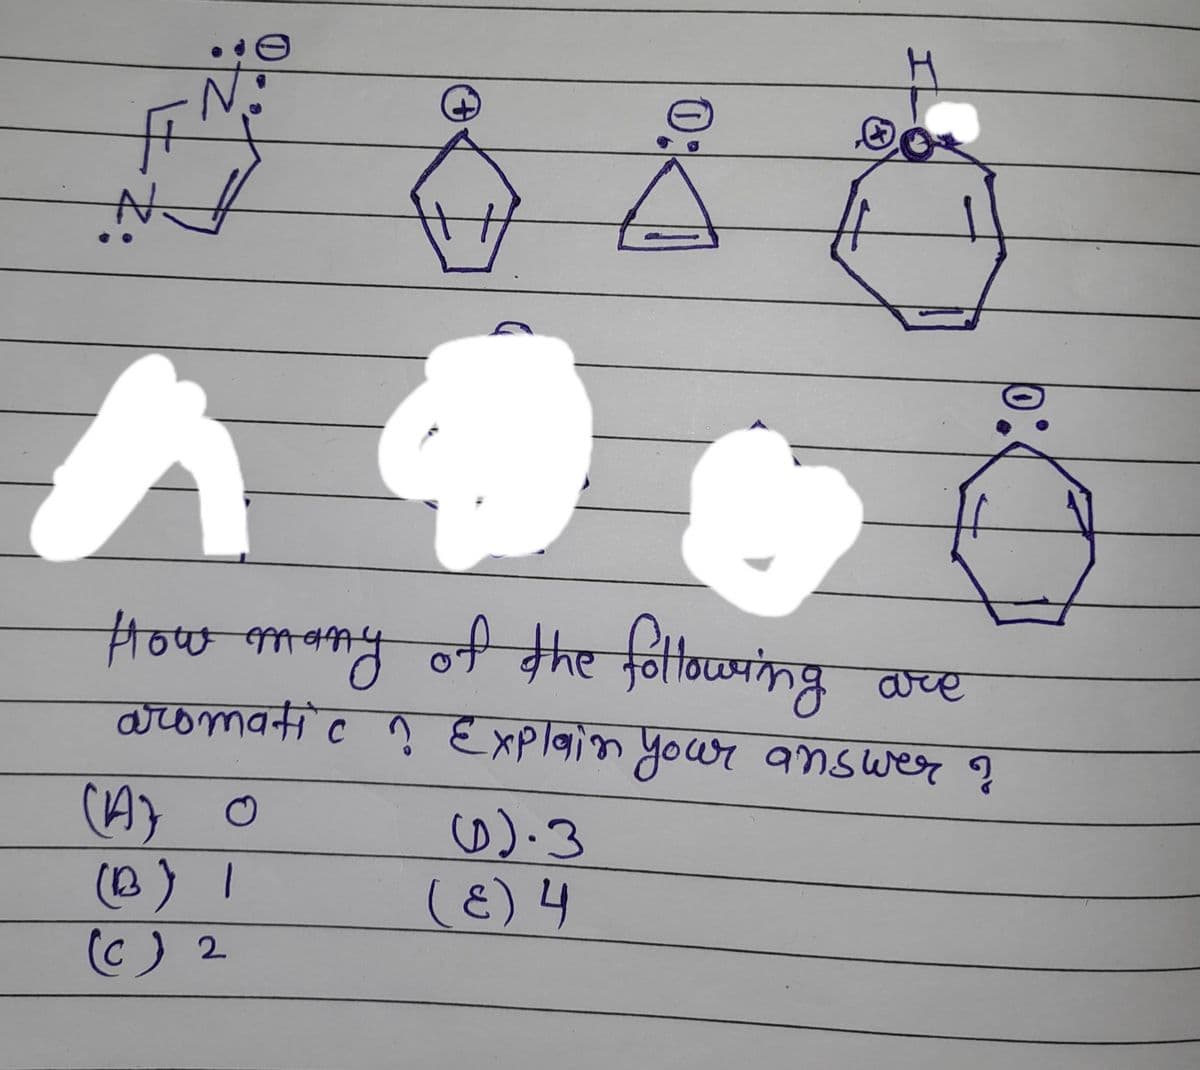 trow meny of the feltoaring
of the fottowring are
aromatic ? Explaion your answer ?
(A) 0
(B)1
(C) 2
W).3
(E) 4
